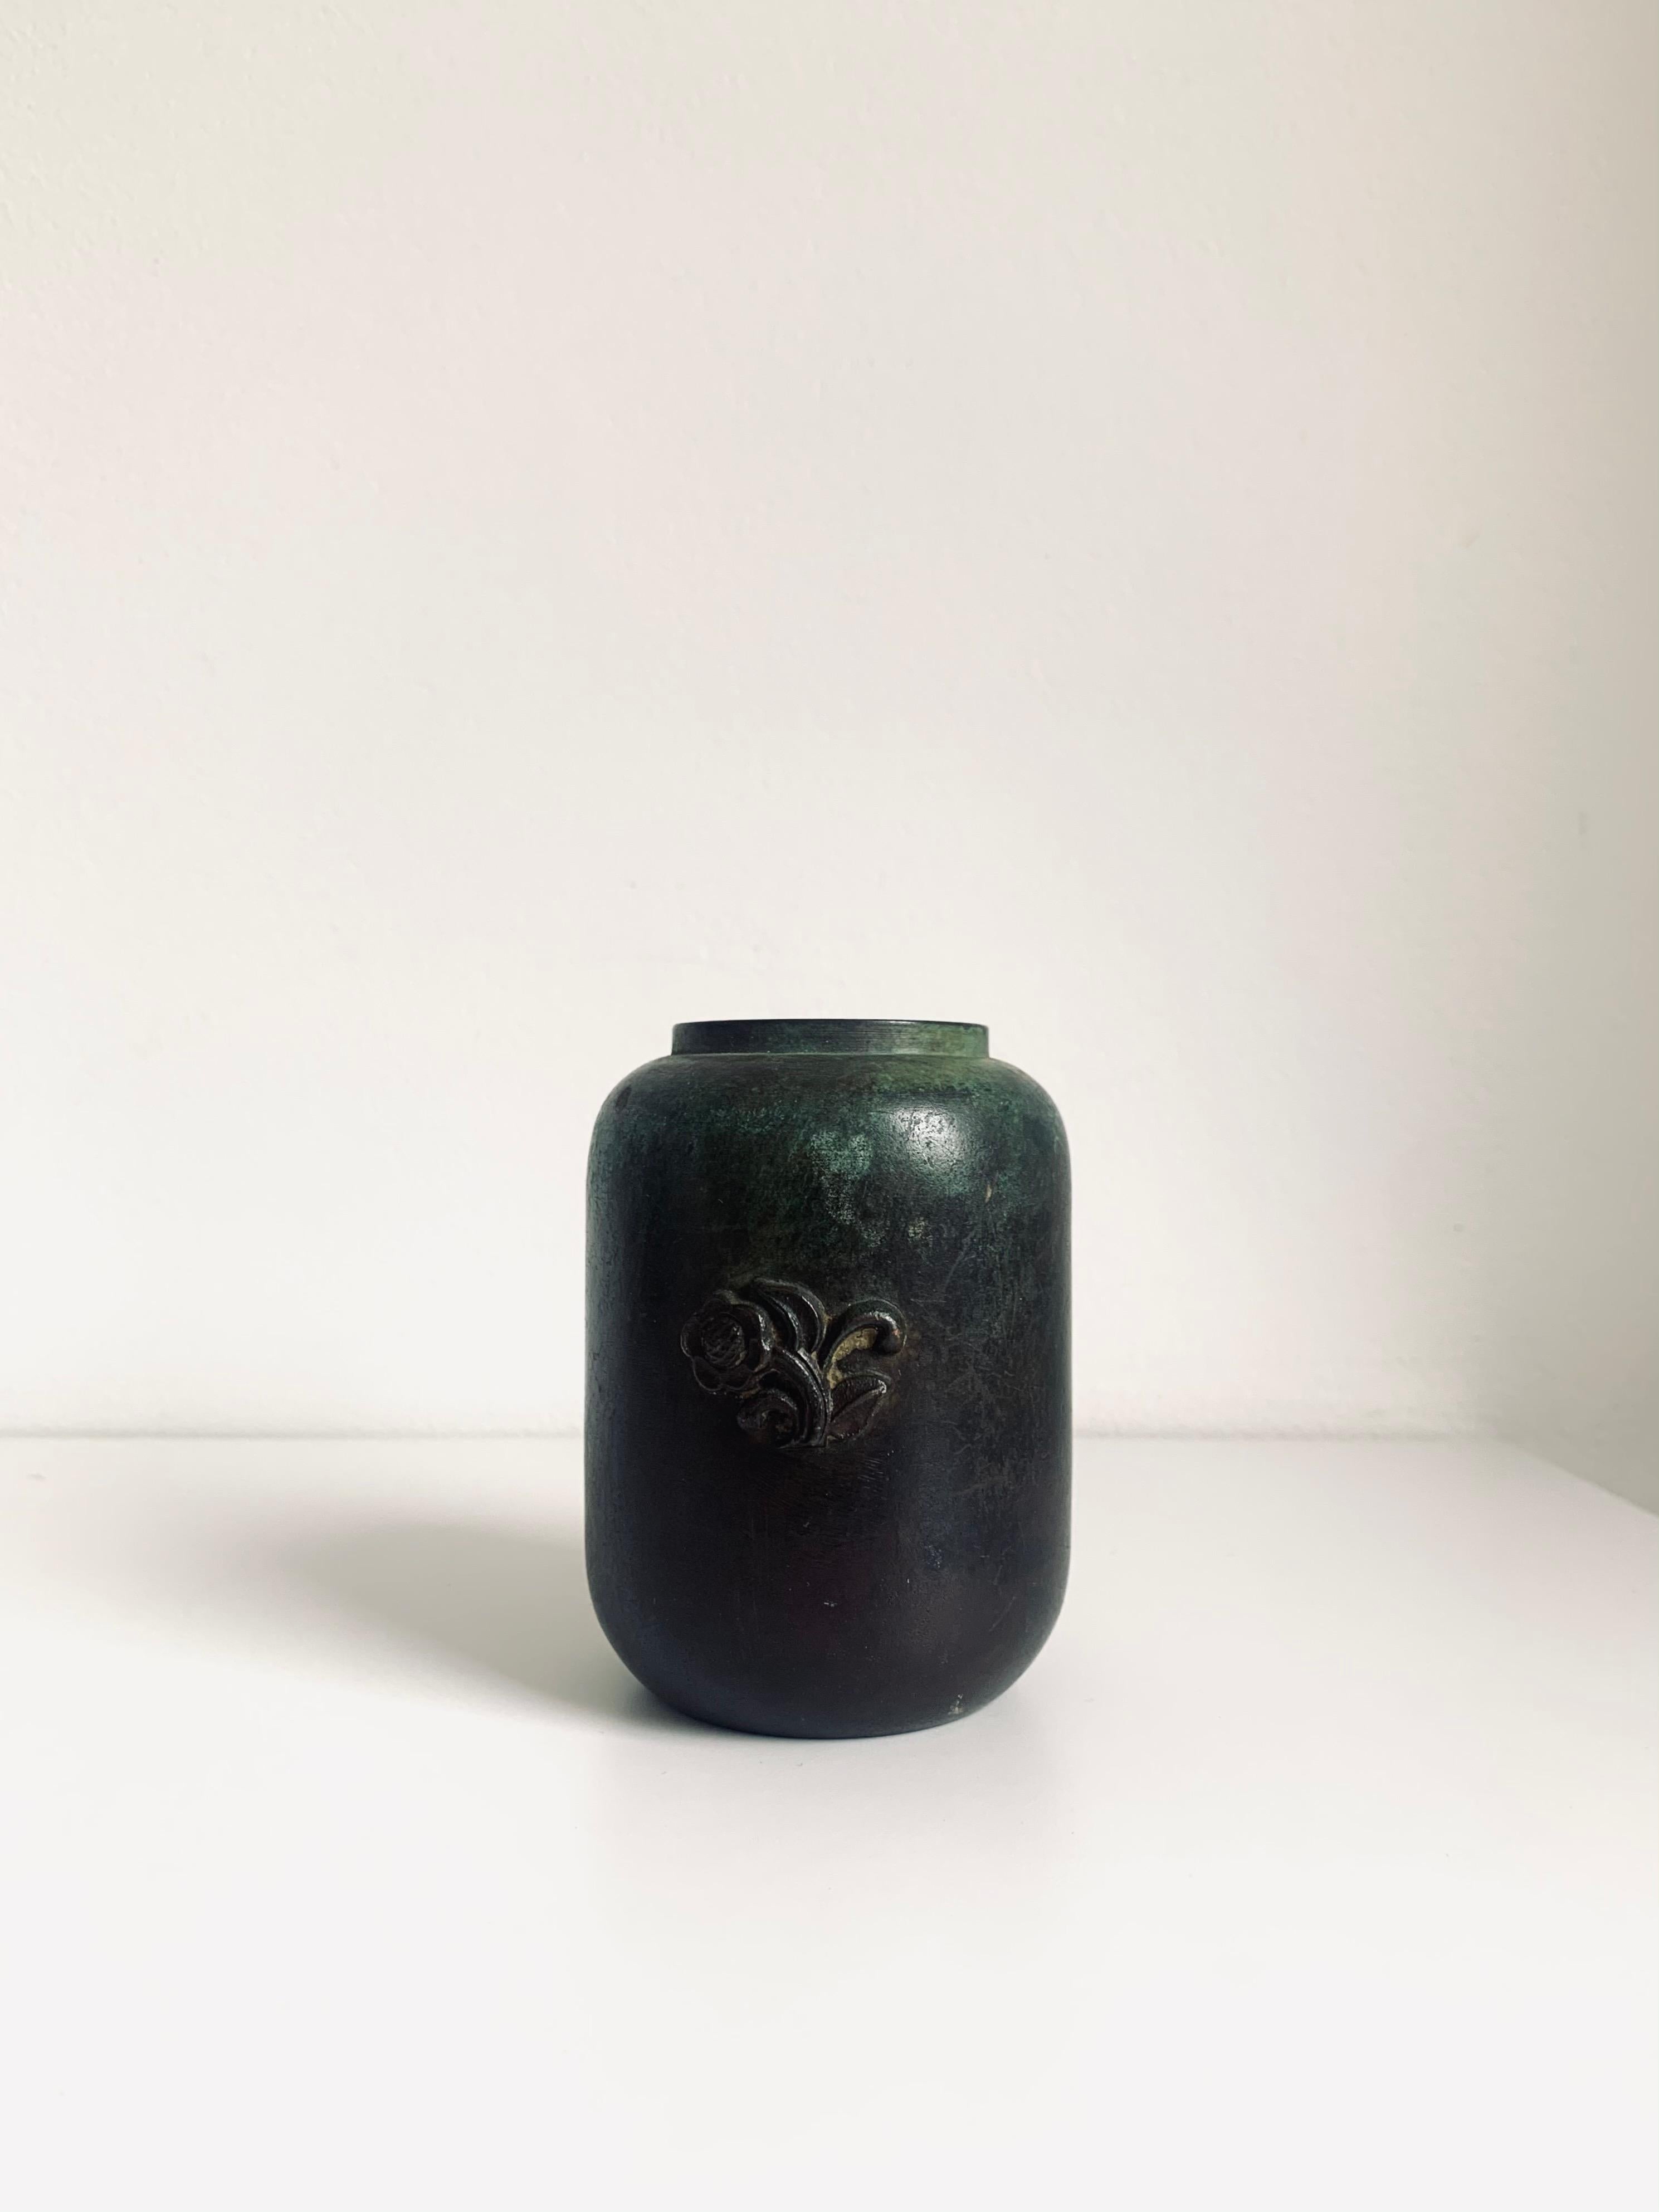 Small Swedish modern patinated bronze vase decorated with a simple flower in relief, made by Guldsmedsaktiebolaget (GAB), in the 1930s. Model 265, marked with the sheaf of wheat symbol indicating excellent quality. Stamped GAB, Brons, 256. Elegant